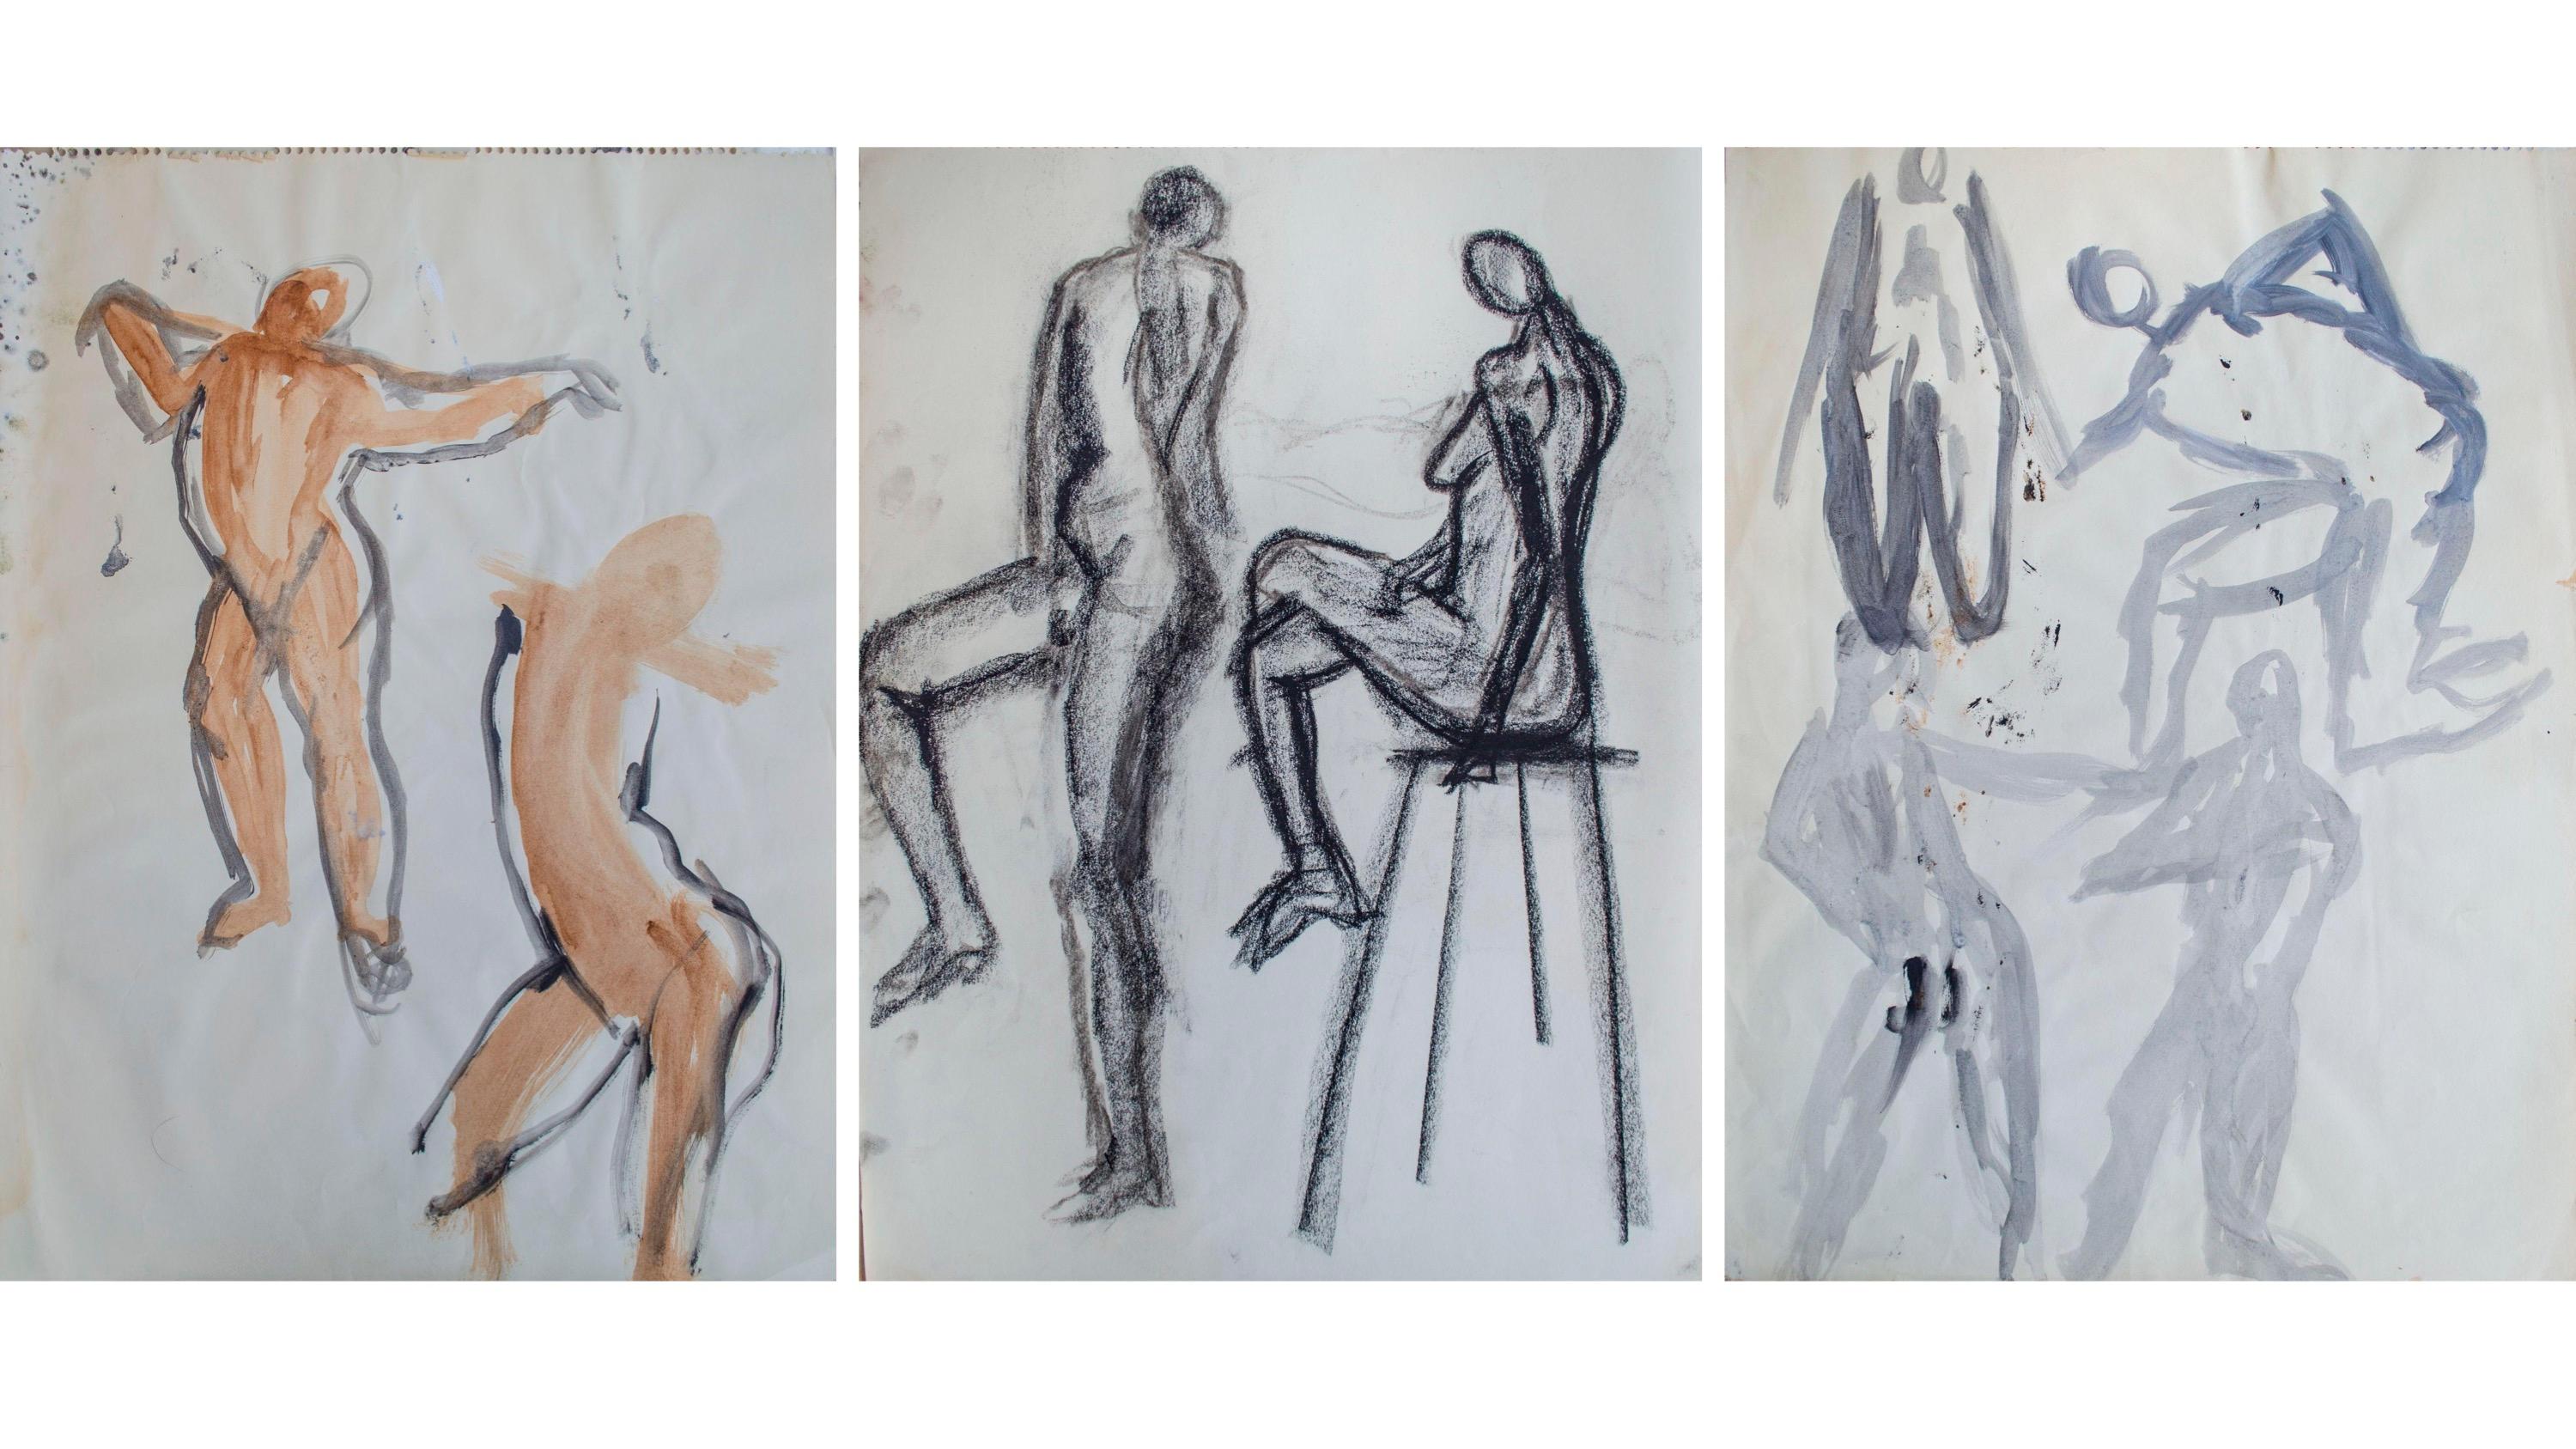 Group of 3 Figure Drawings by Attributed to Ross Bleckner